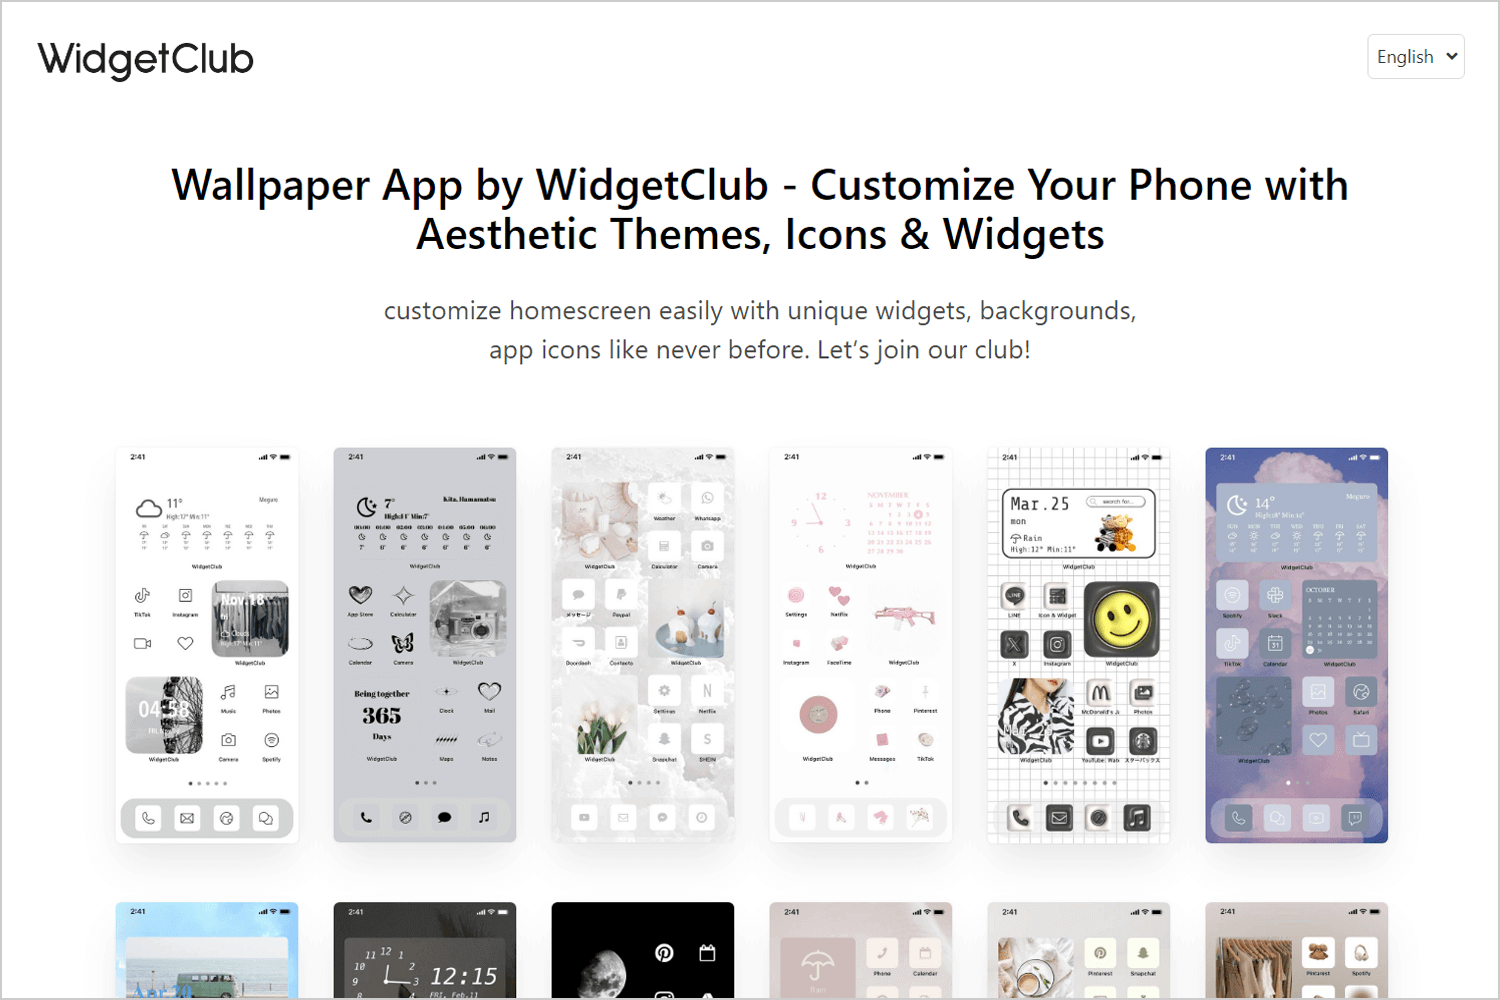 WidgetClub app showing different ways to customize your phone's home screen with cool themes, icons, and widgets